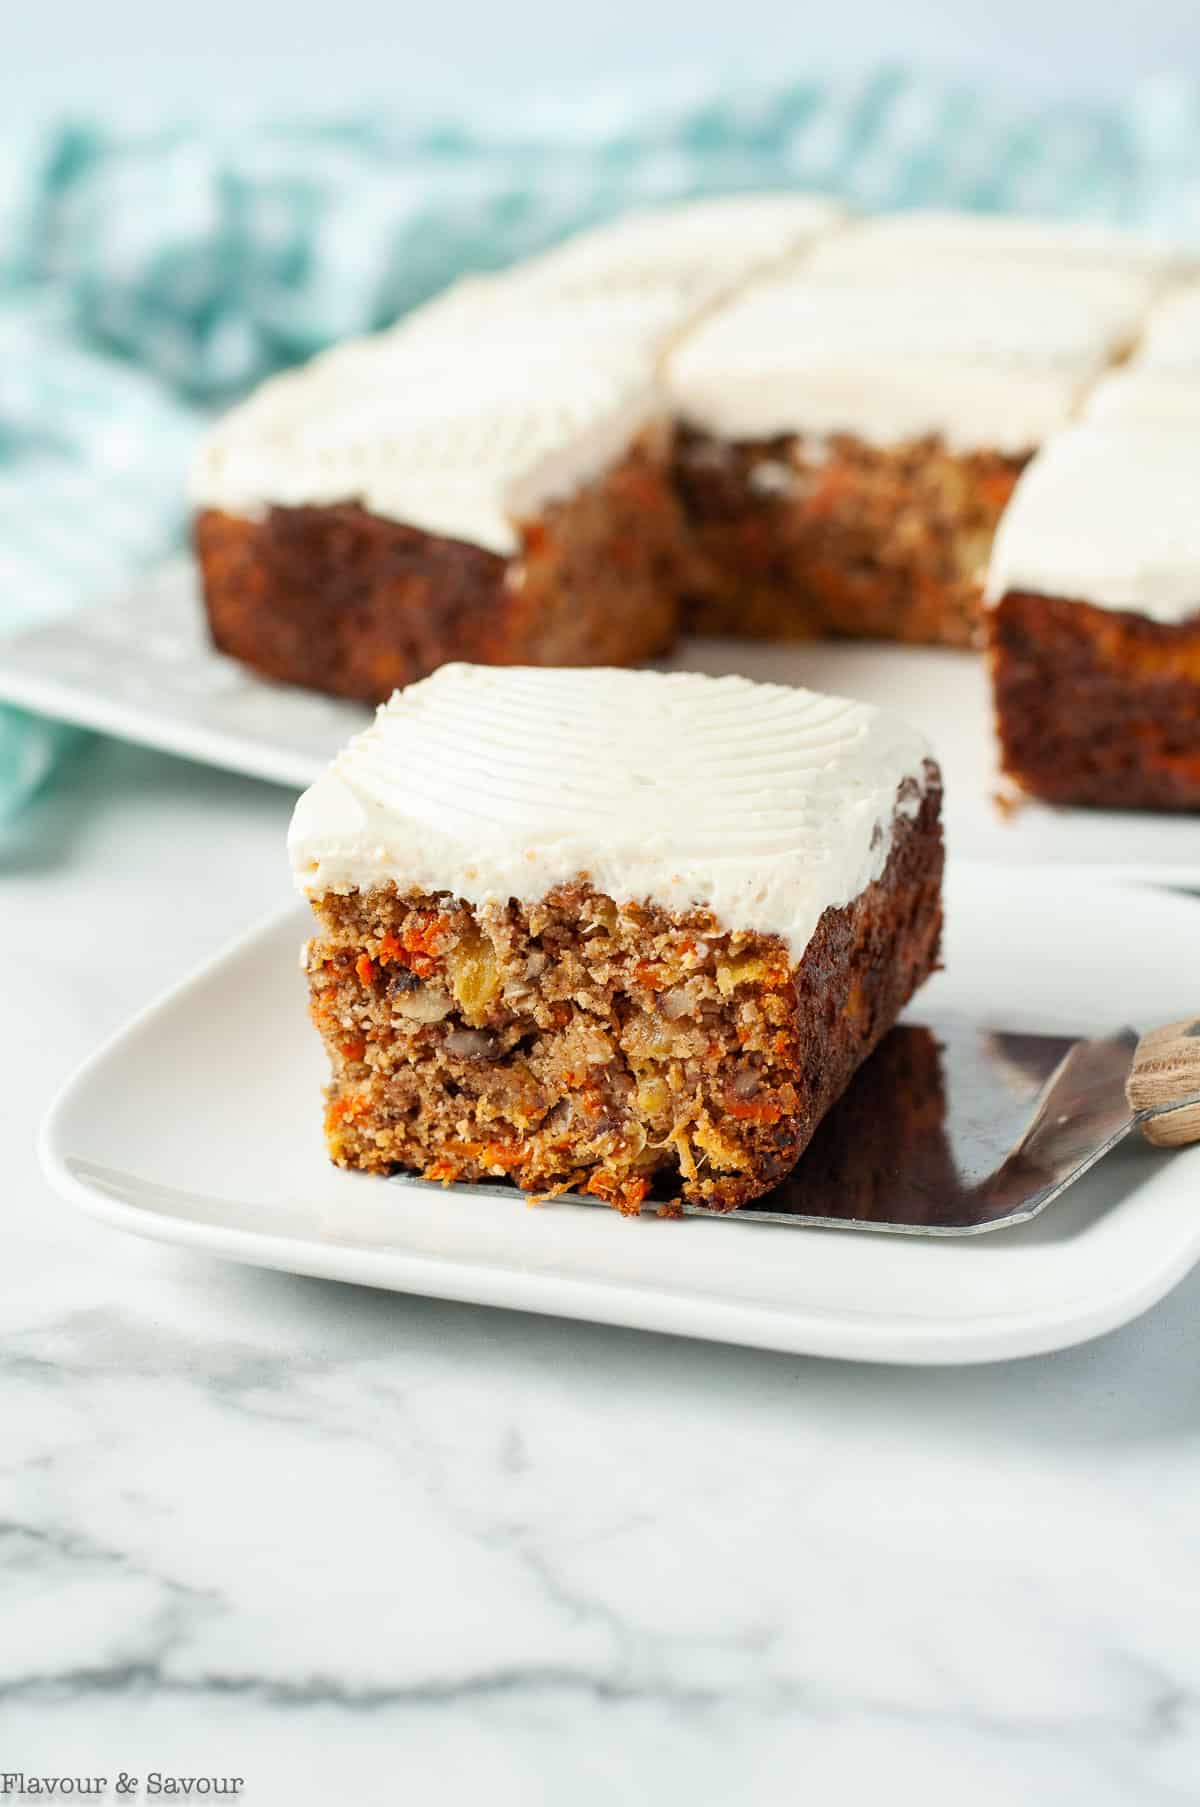 A square of carrot cake with the remaining cake in the background